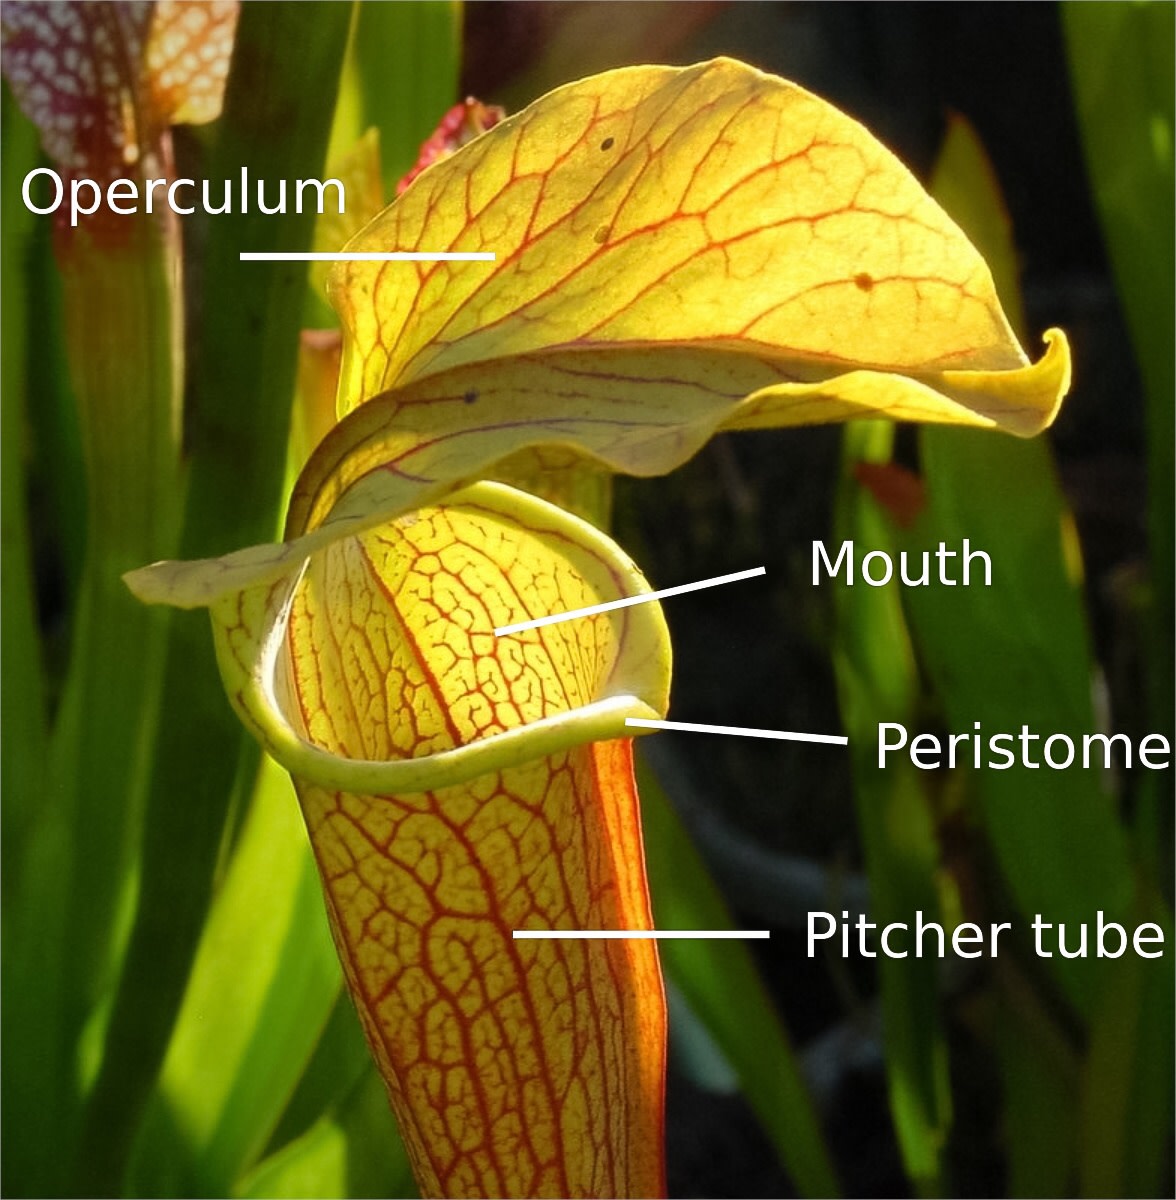 A species of Sarracenia, which is a type of pitcher plant